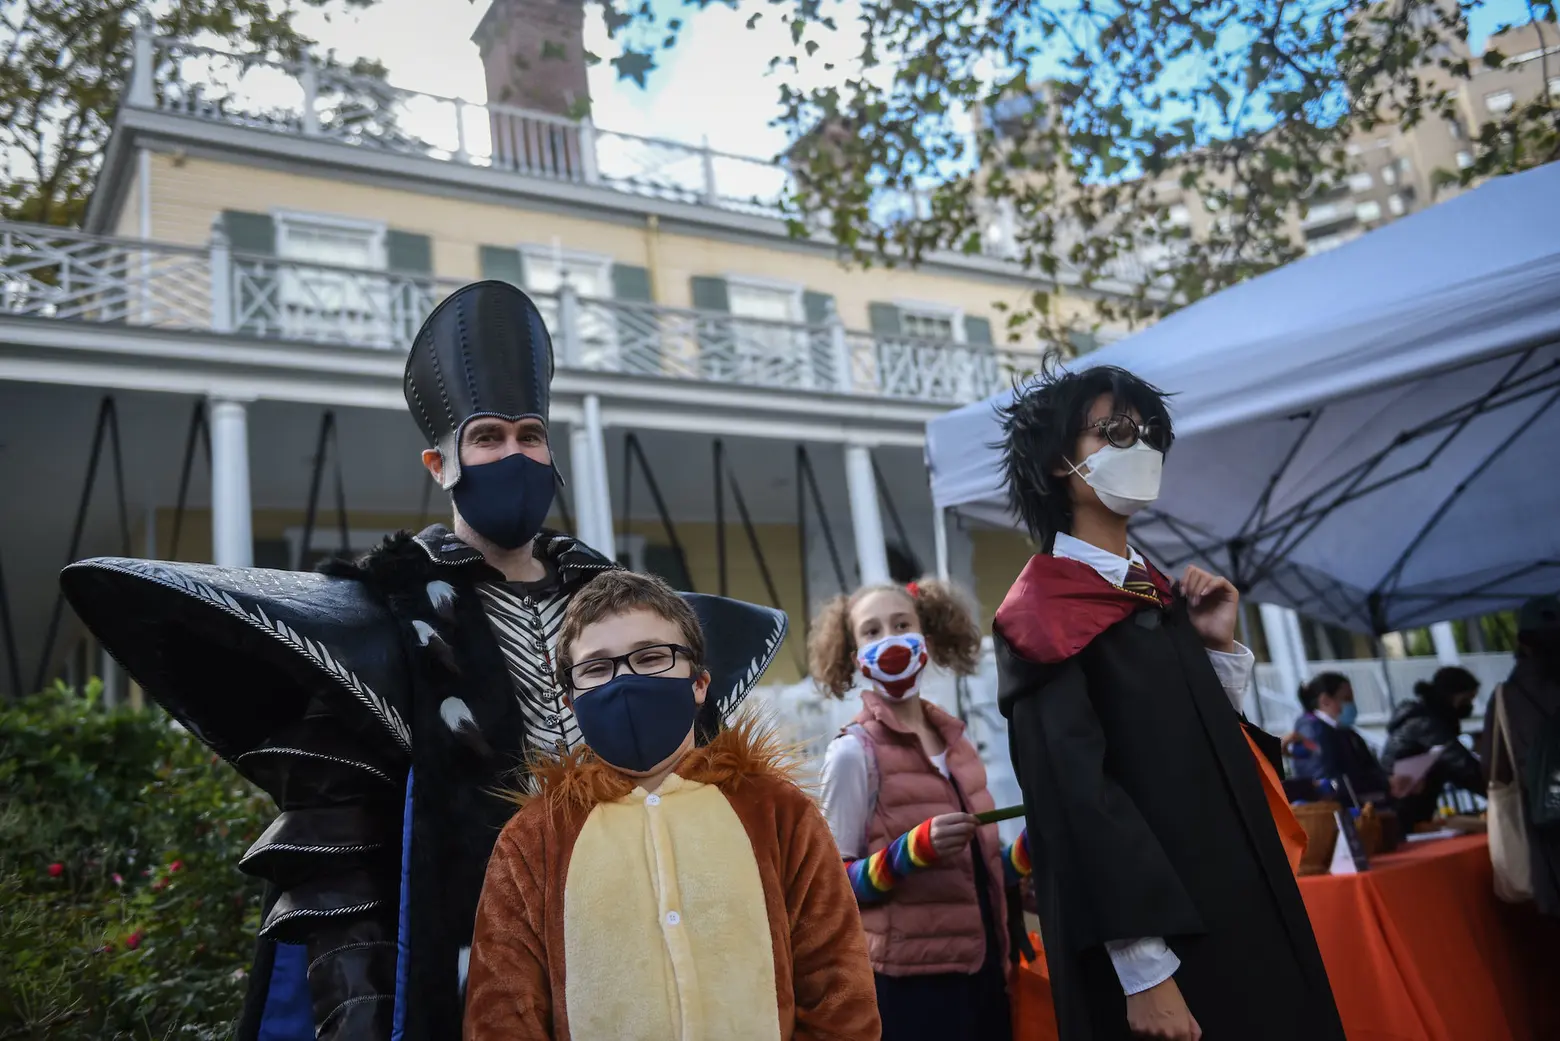 Mayor Adams to host haunted Halloween party at Gracie Mansion